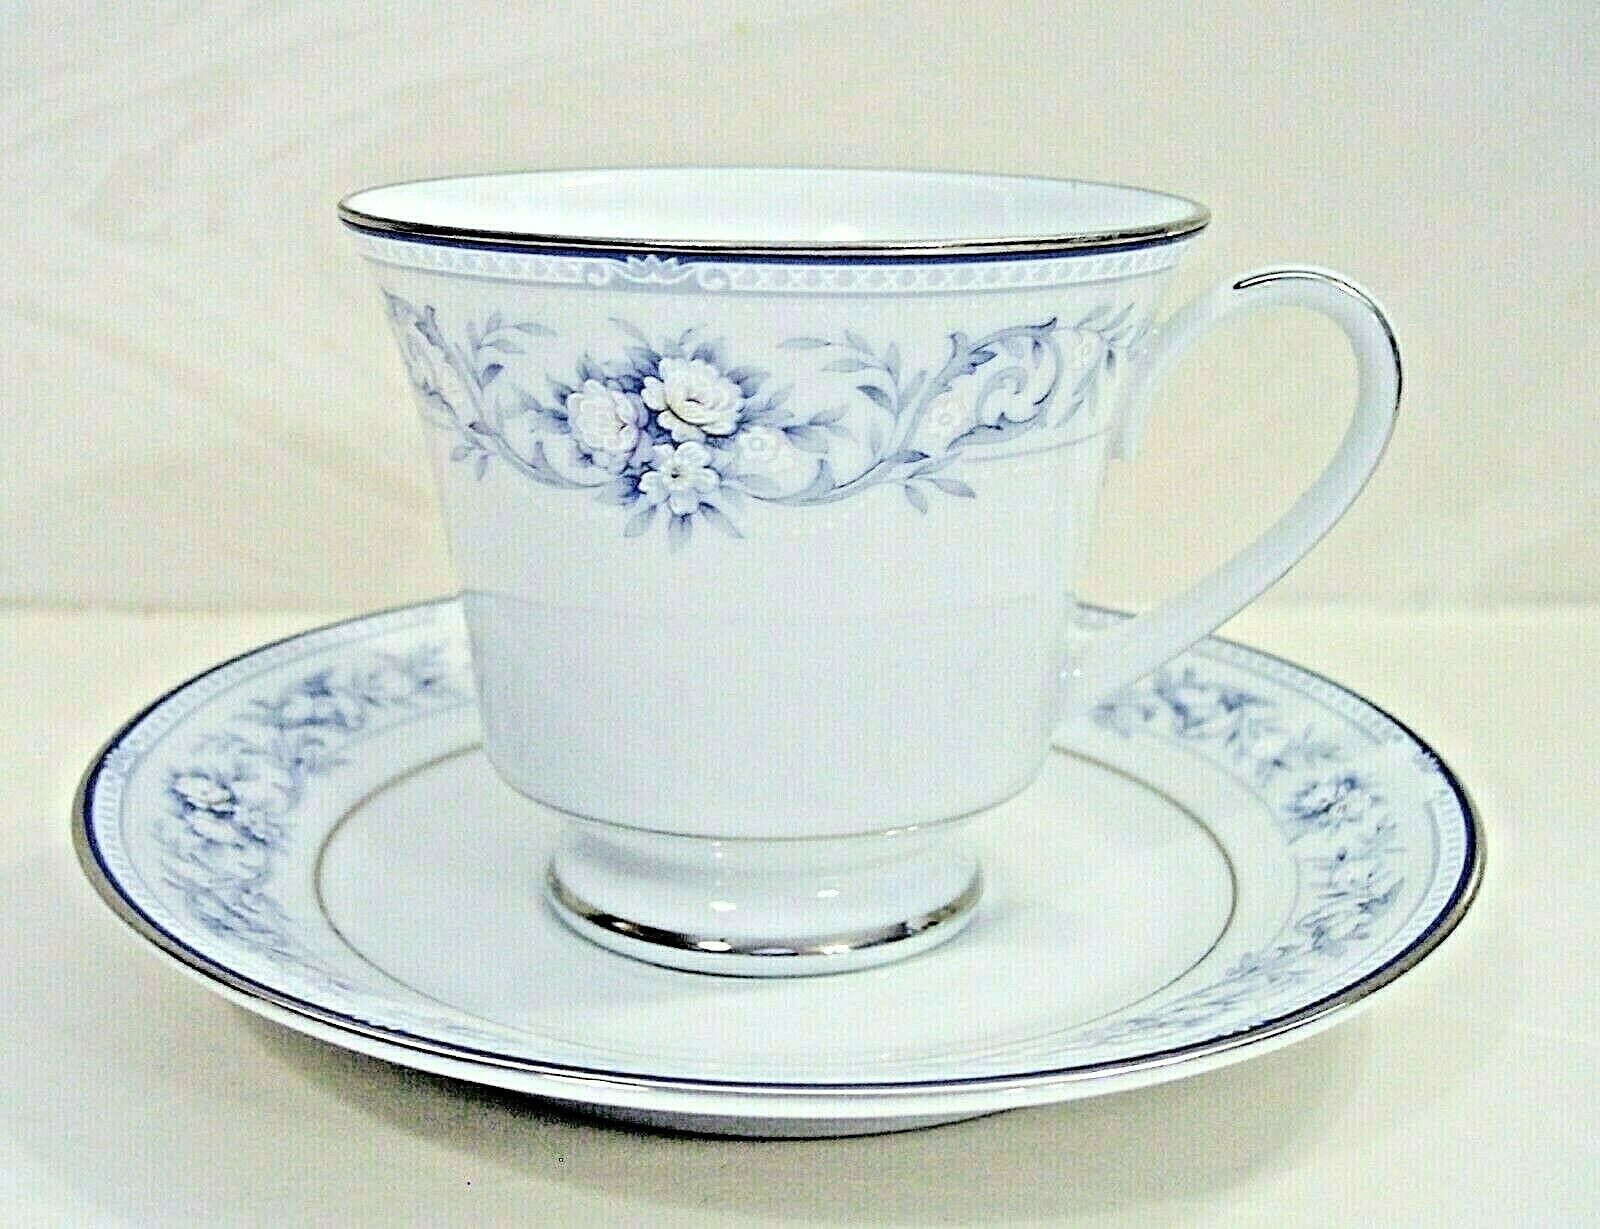 Noritake China Legendary "dearborn" Cup And Saucer - 4218